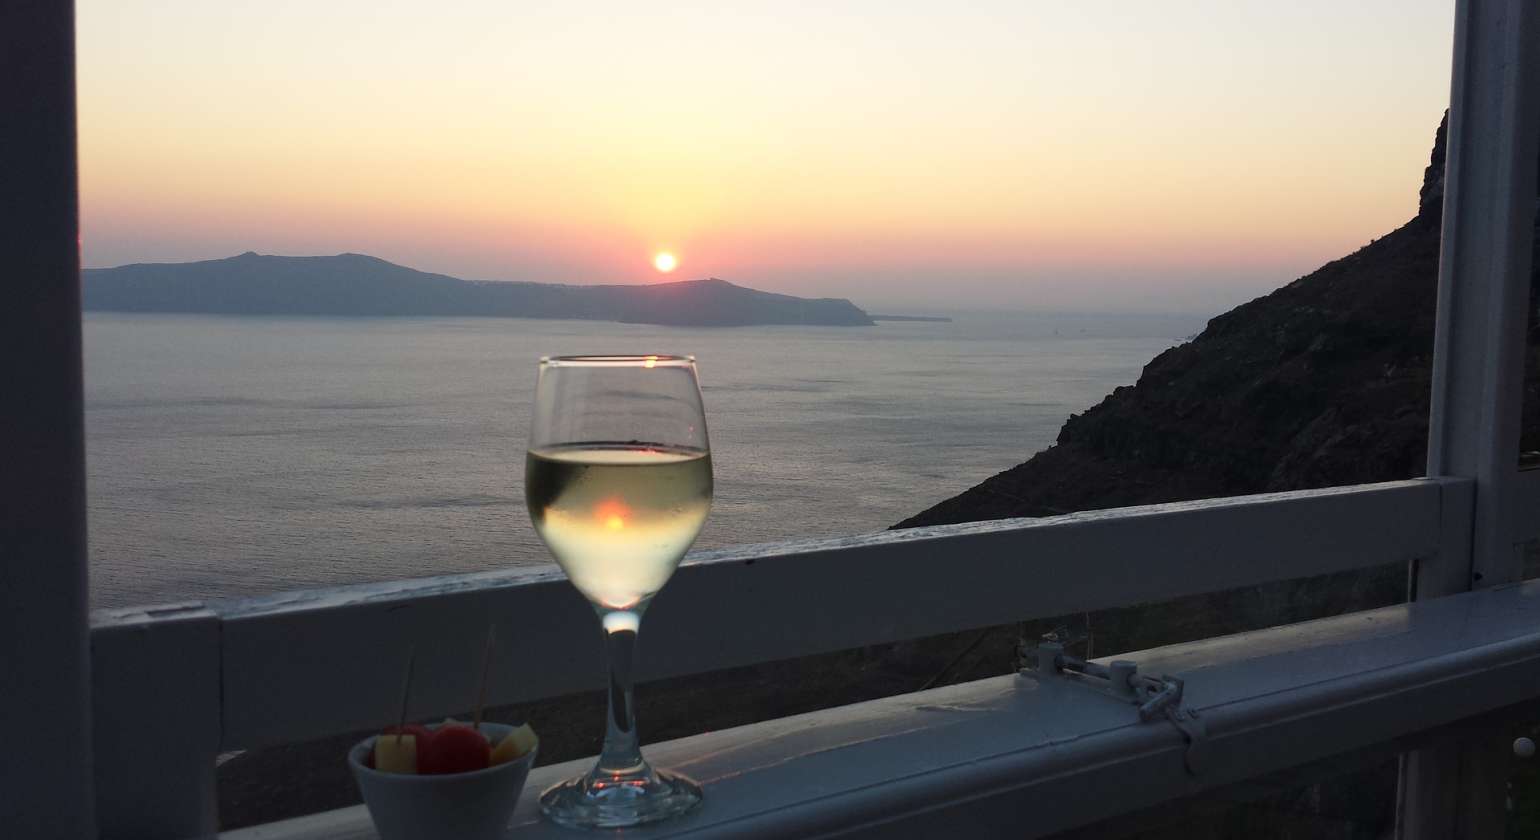 Enjoy a Drink along with Santorini’s Sunset View